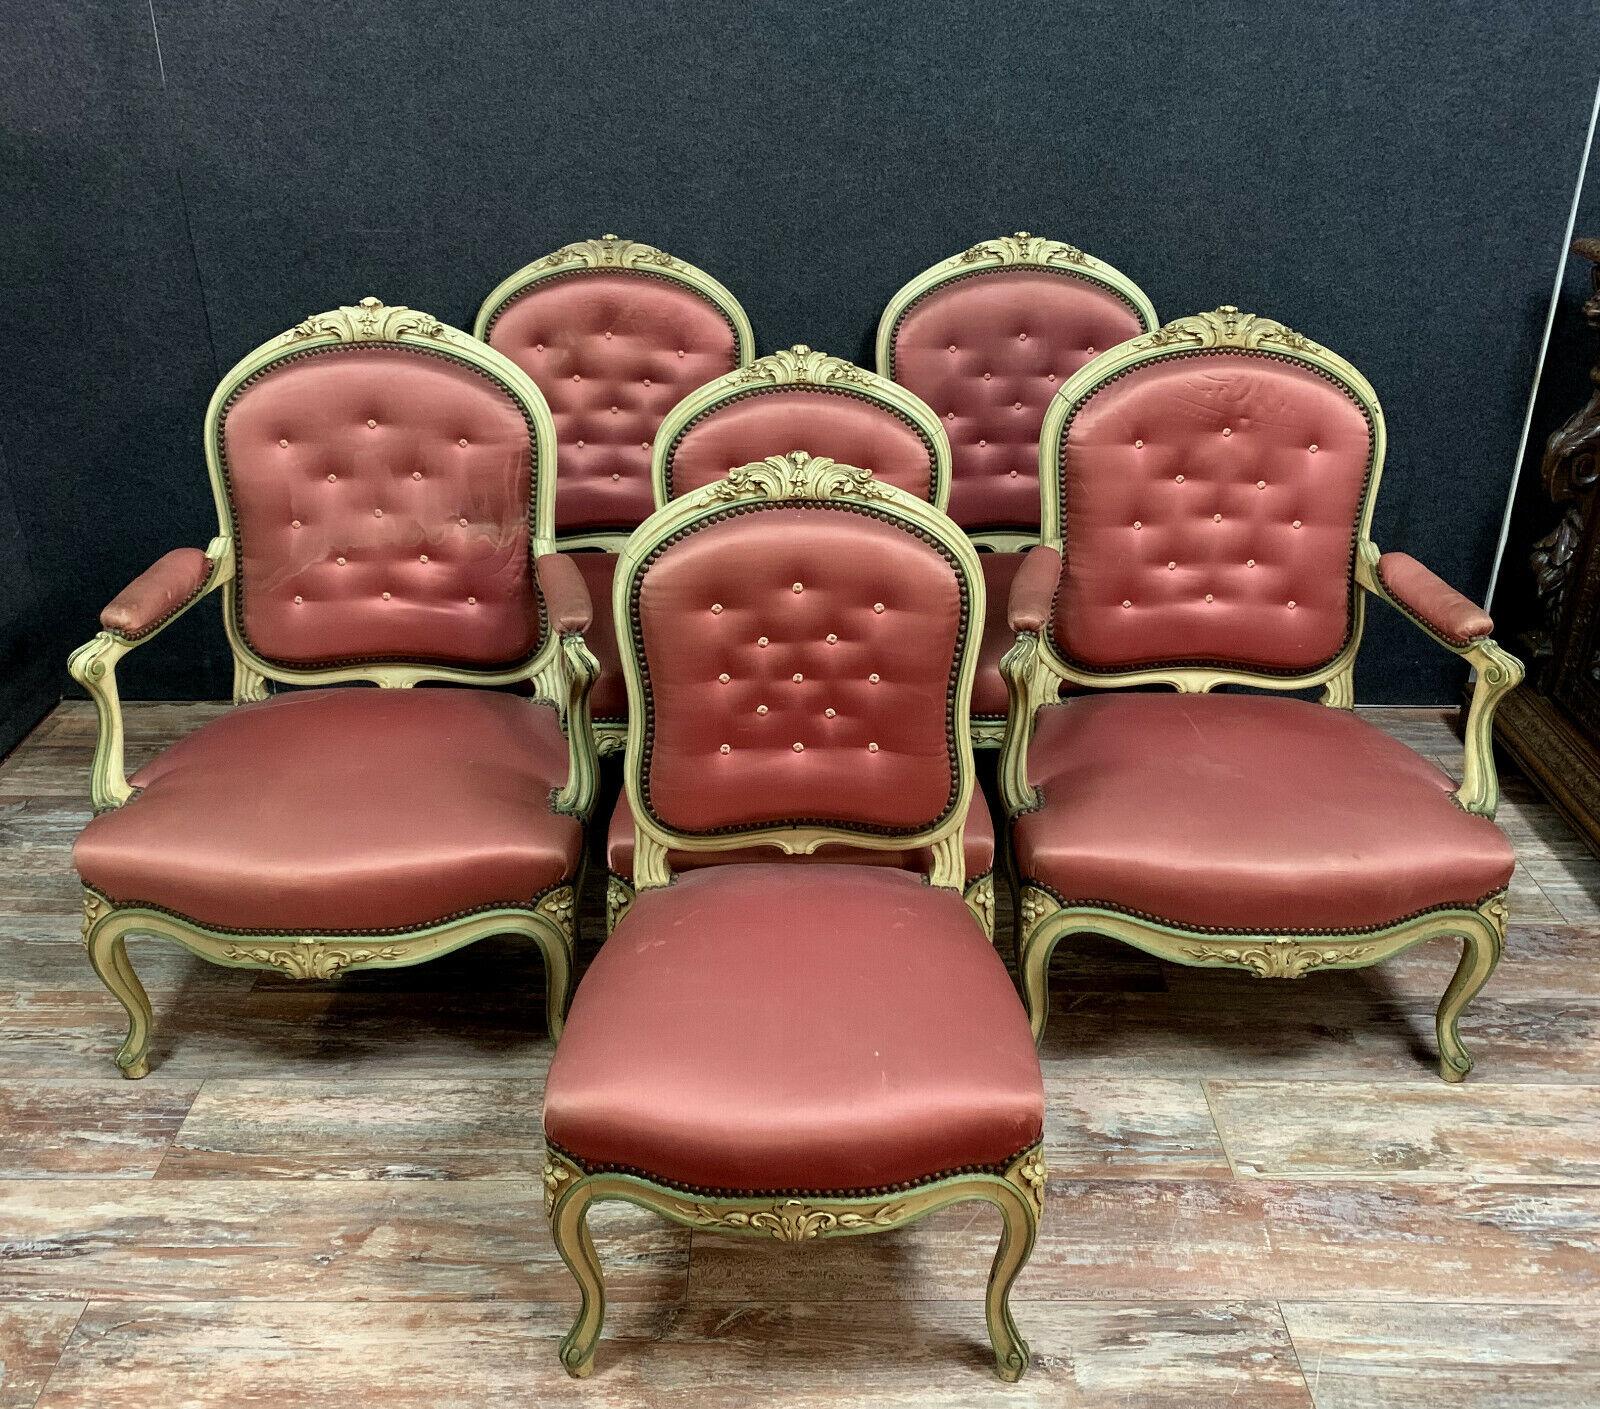 Louis XV Lacquered Wood Salon Furniture Set with 4 Armchairs and 2 Chairs -1X01 3